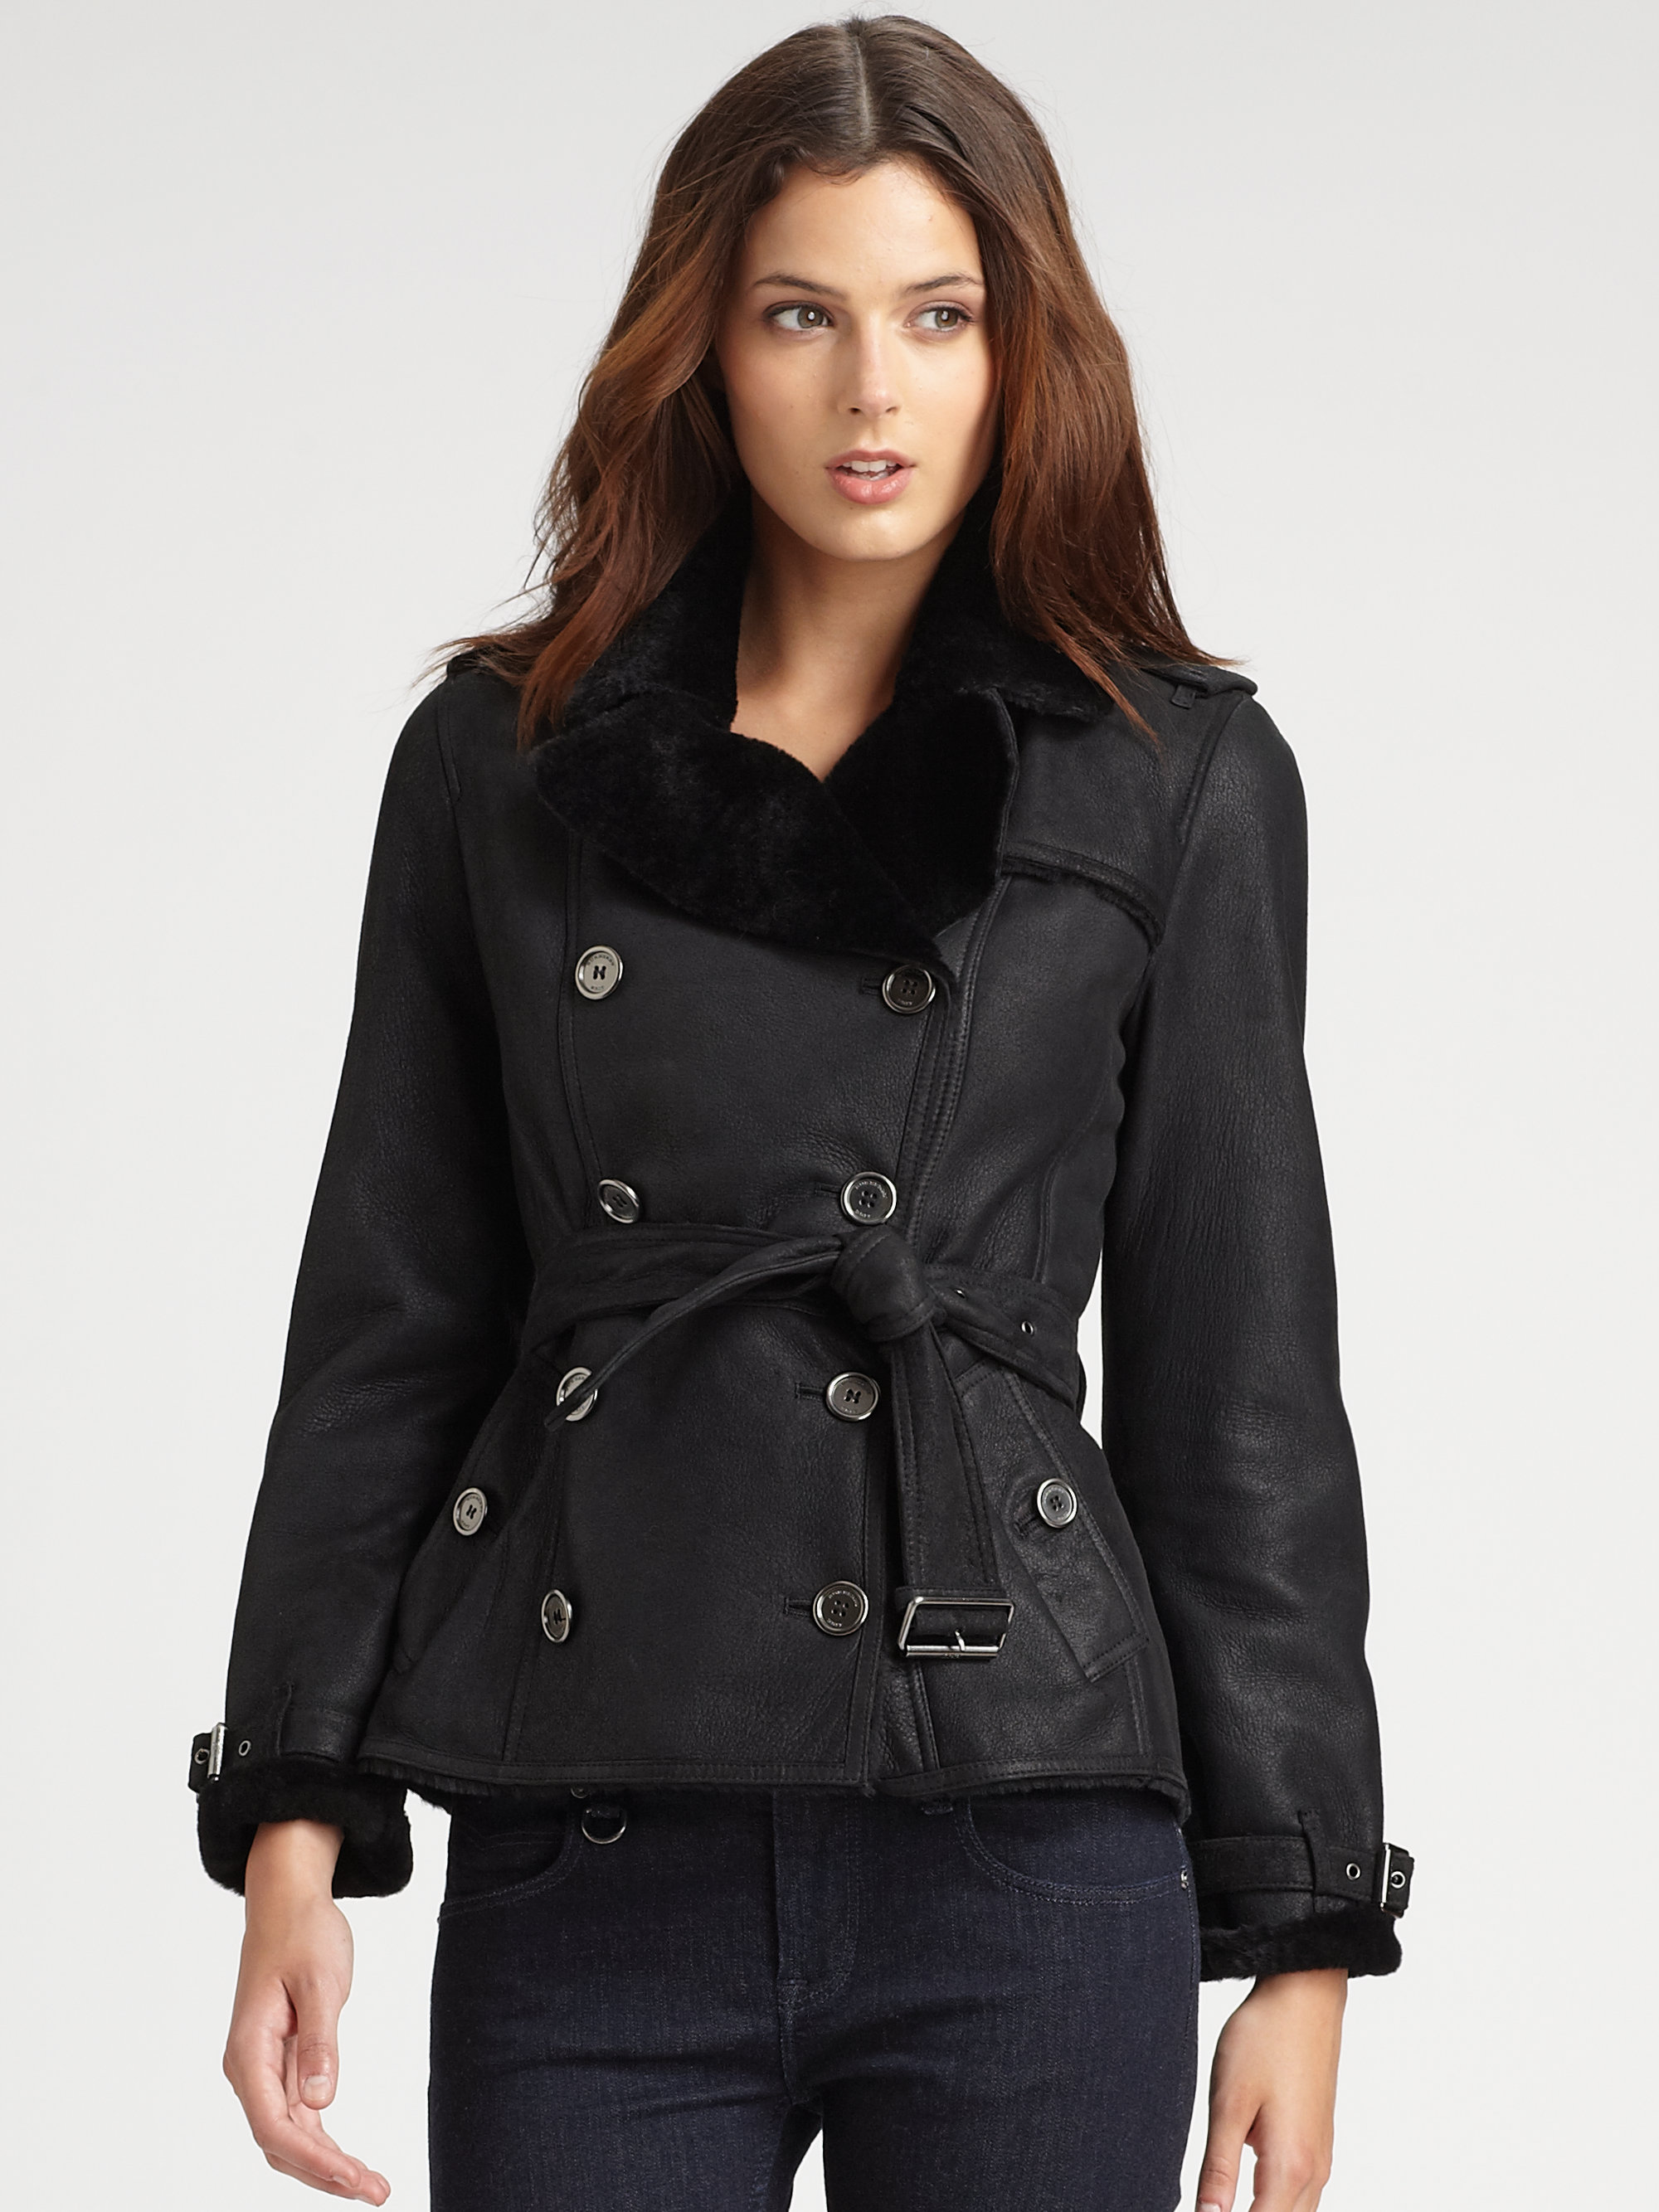 Burberry Brit Shearling Jacket in Black 